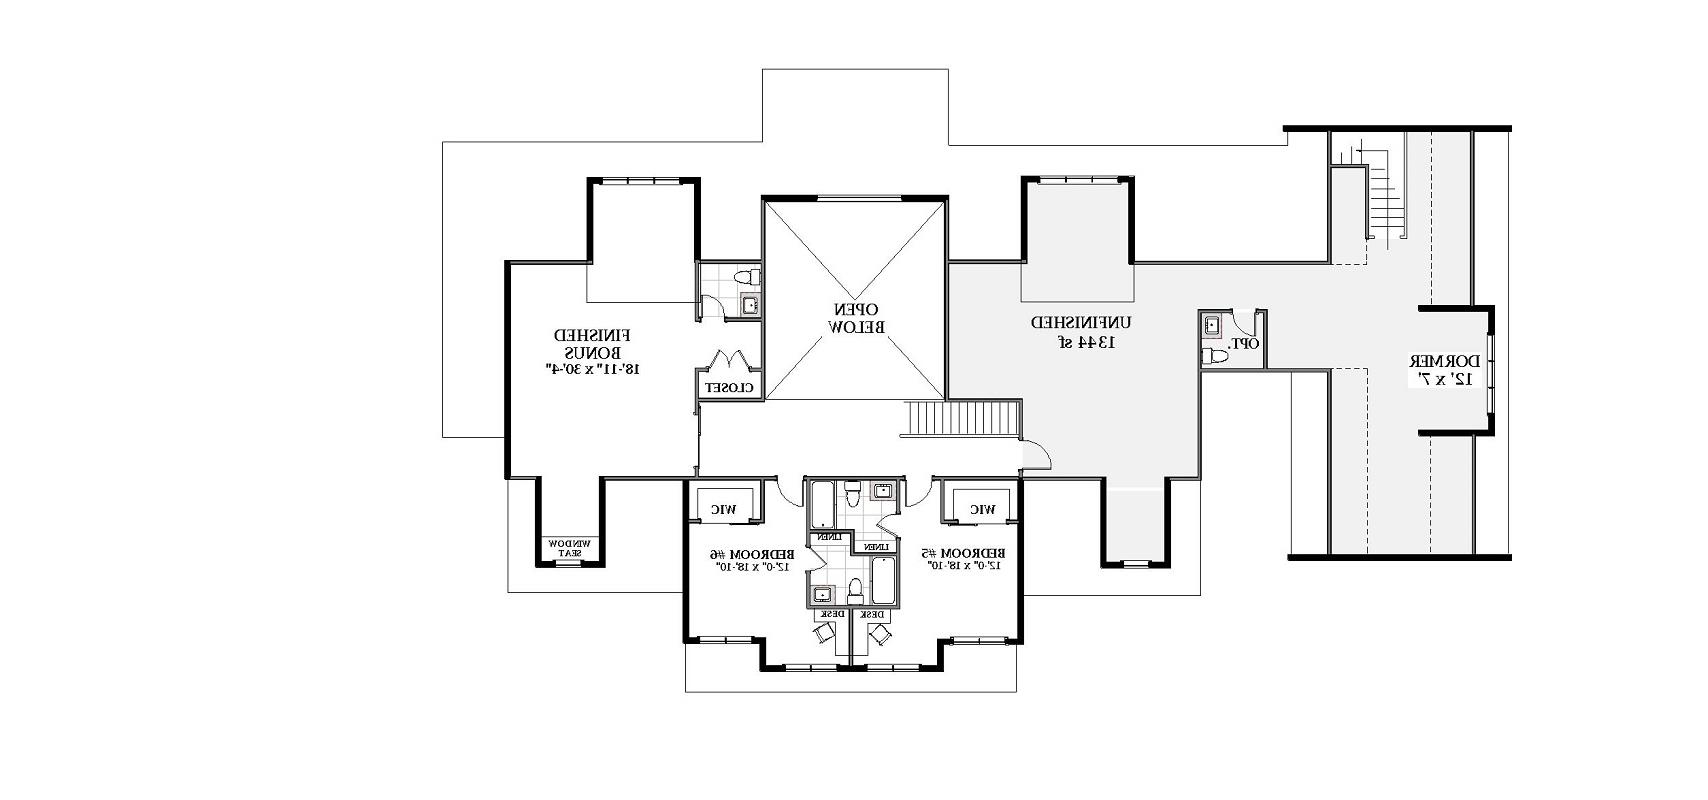 2nd Floor image of Windmere House Plan